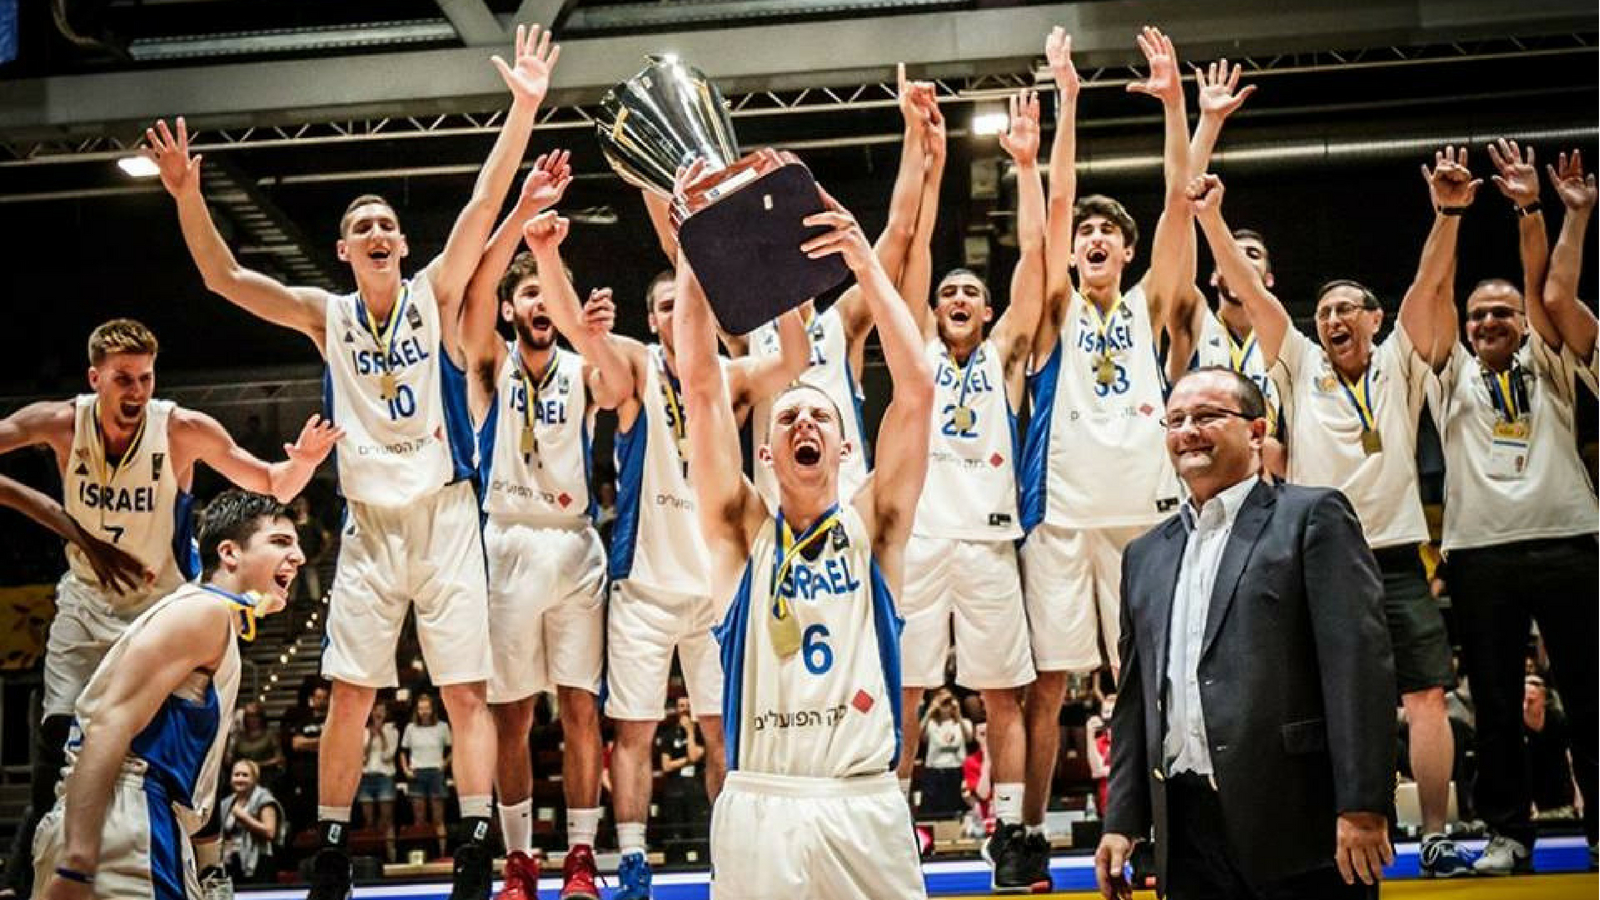 Members of the Israeli under-20 basketball team at the European finals, which they won 80-66 over Croatia. Photo via Facebook